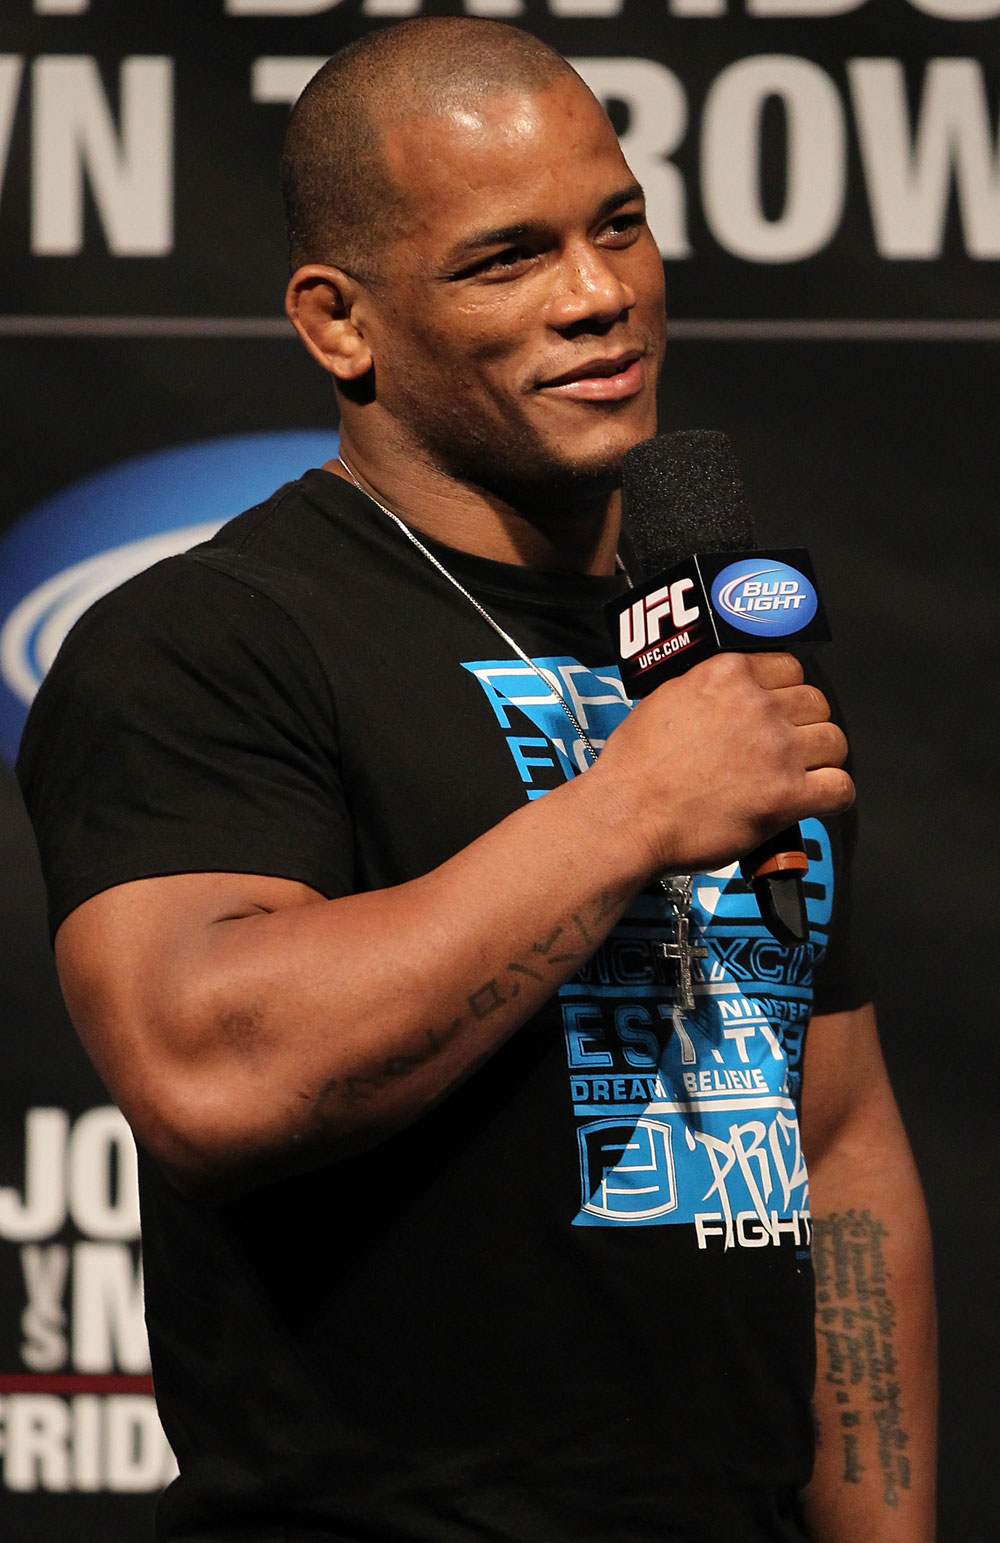 UFC middleweight Hector Lombard